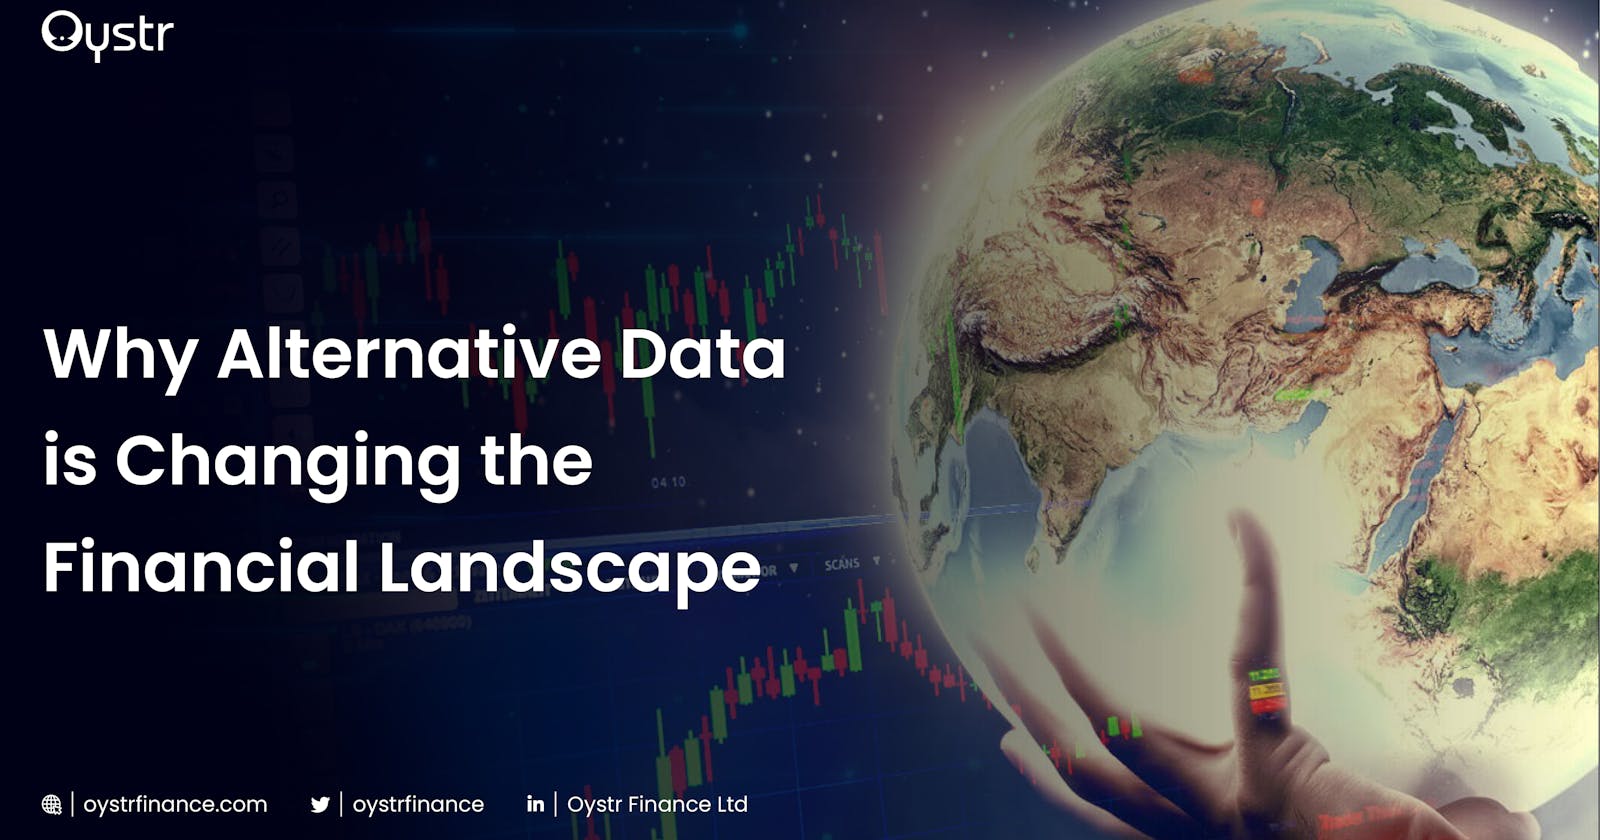 Why Alternative Data Is Changing the Financial Landscape